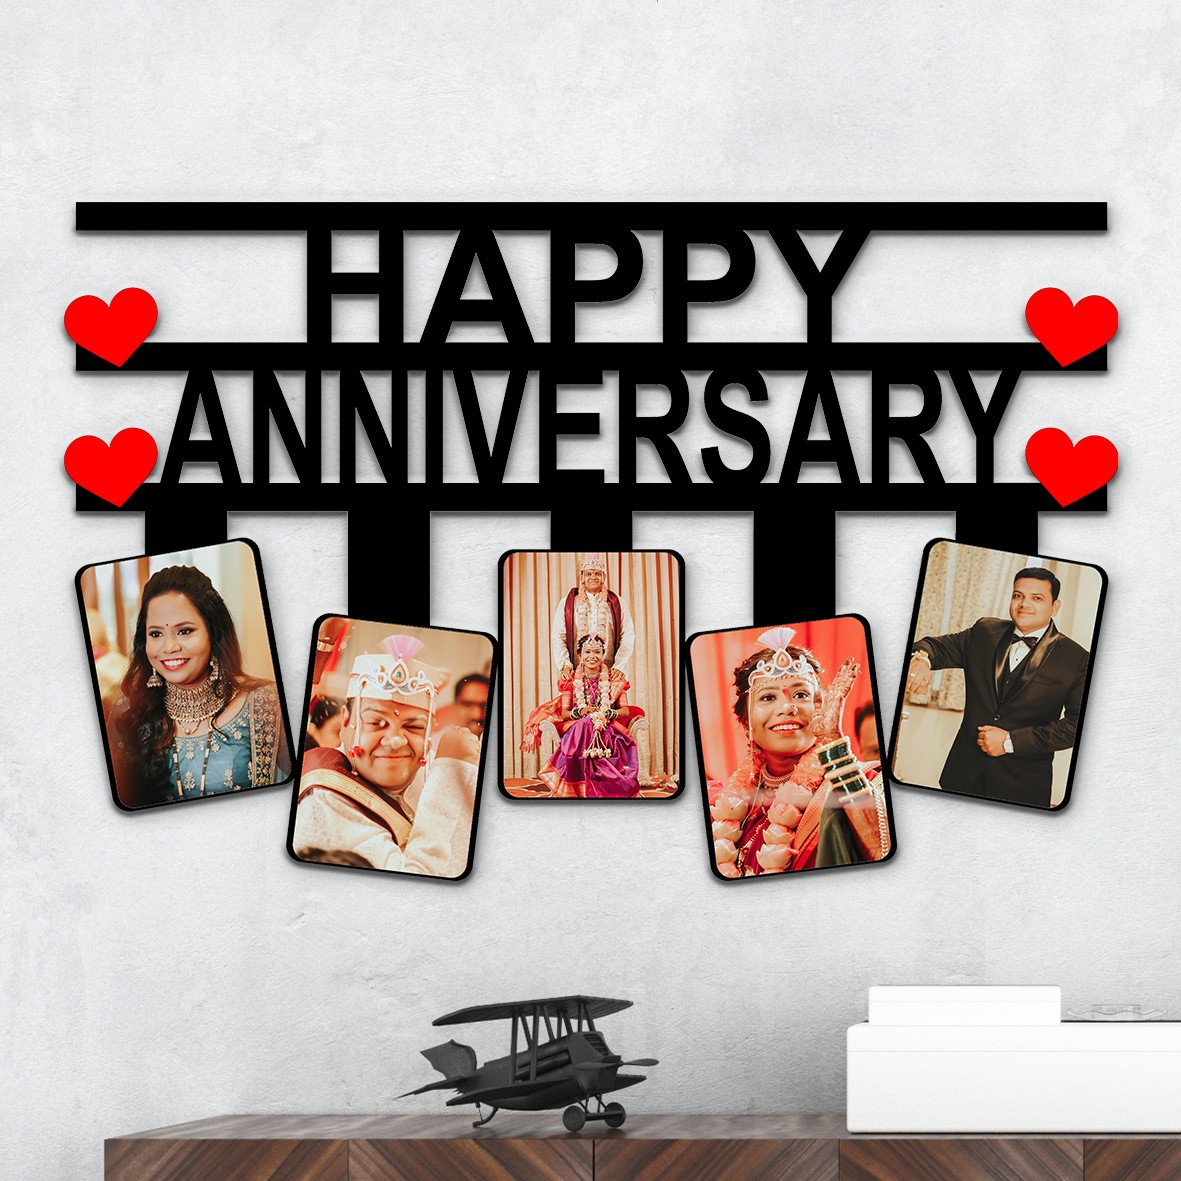 Happy Anniversary Personalized 5 Photos Collage Wall  Frame - 17"x11"x0.5" Frame